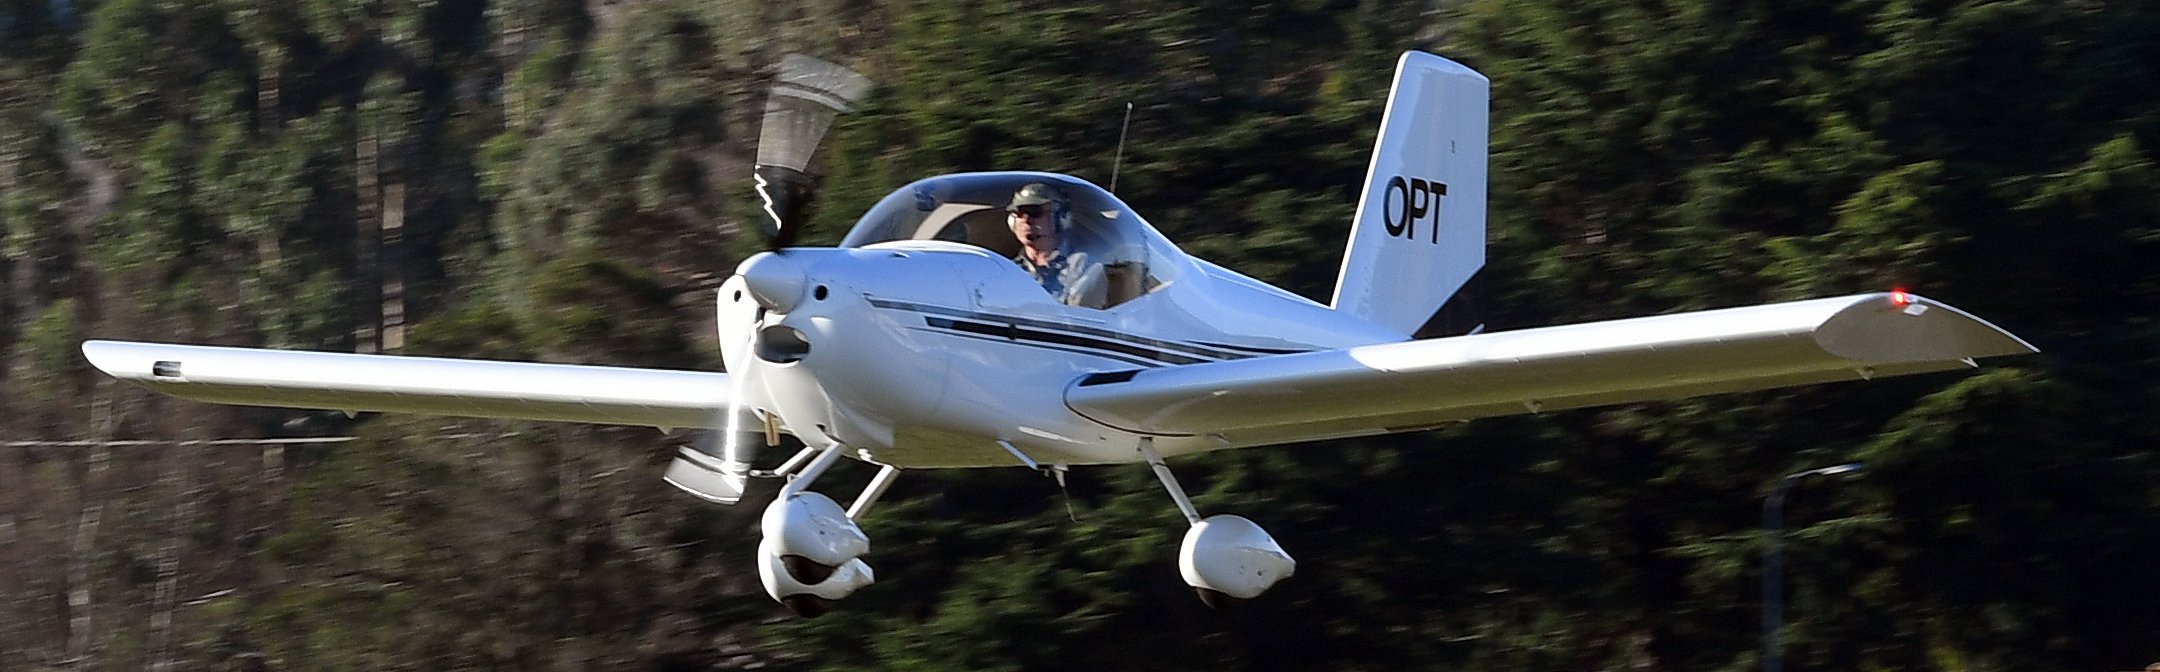 Mr Chalmers touches down in the Vans RV12 following its maiden flight.